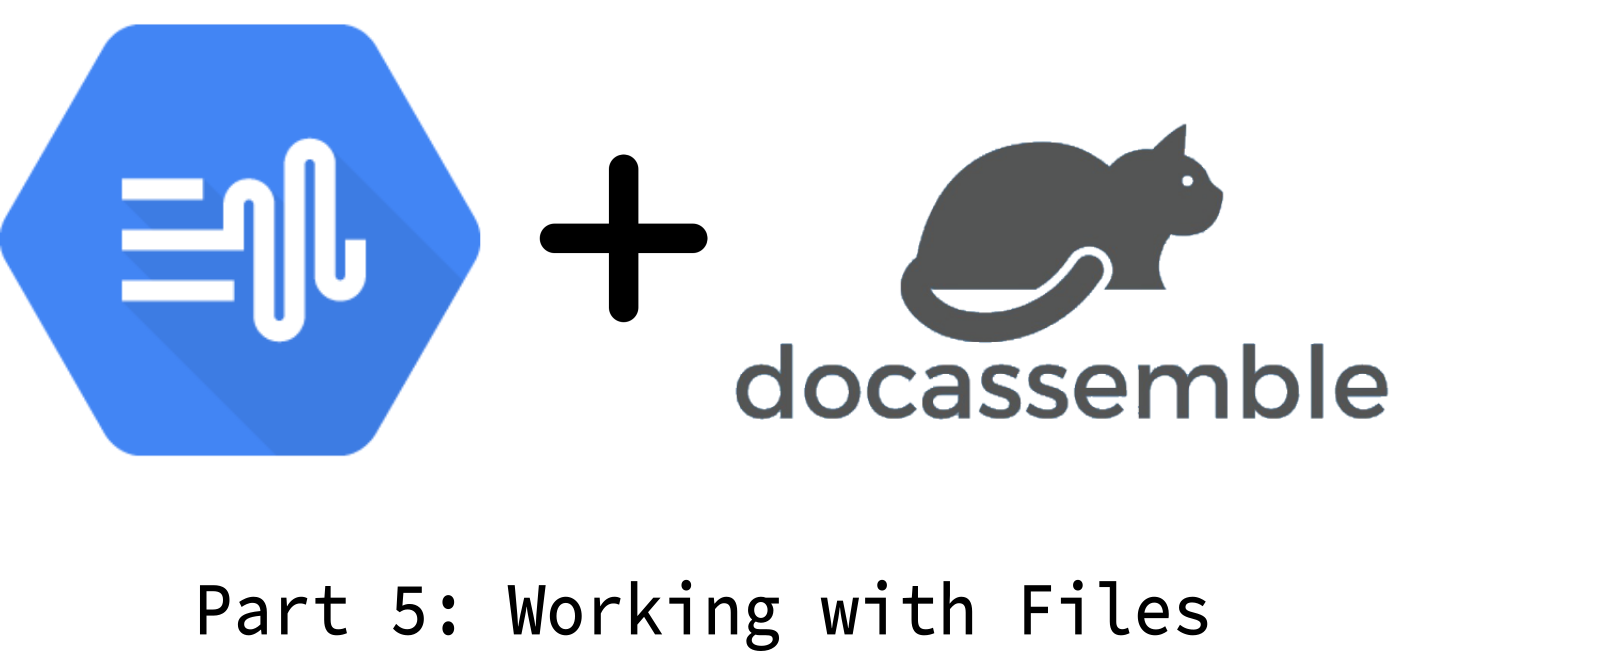 [Part 5] Do more with docassemble: Provide an audio file for your user to download 💾